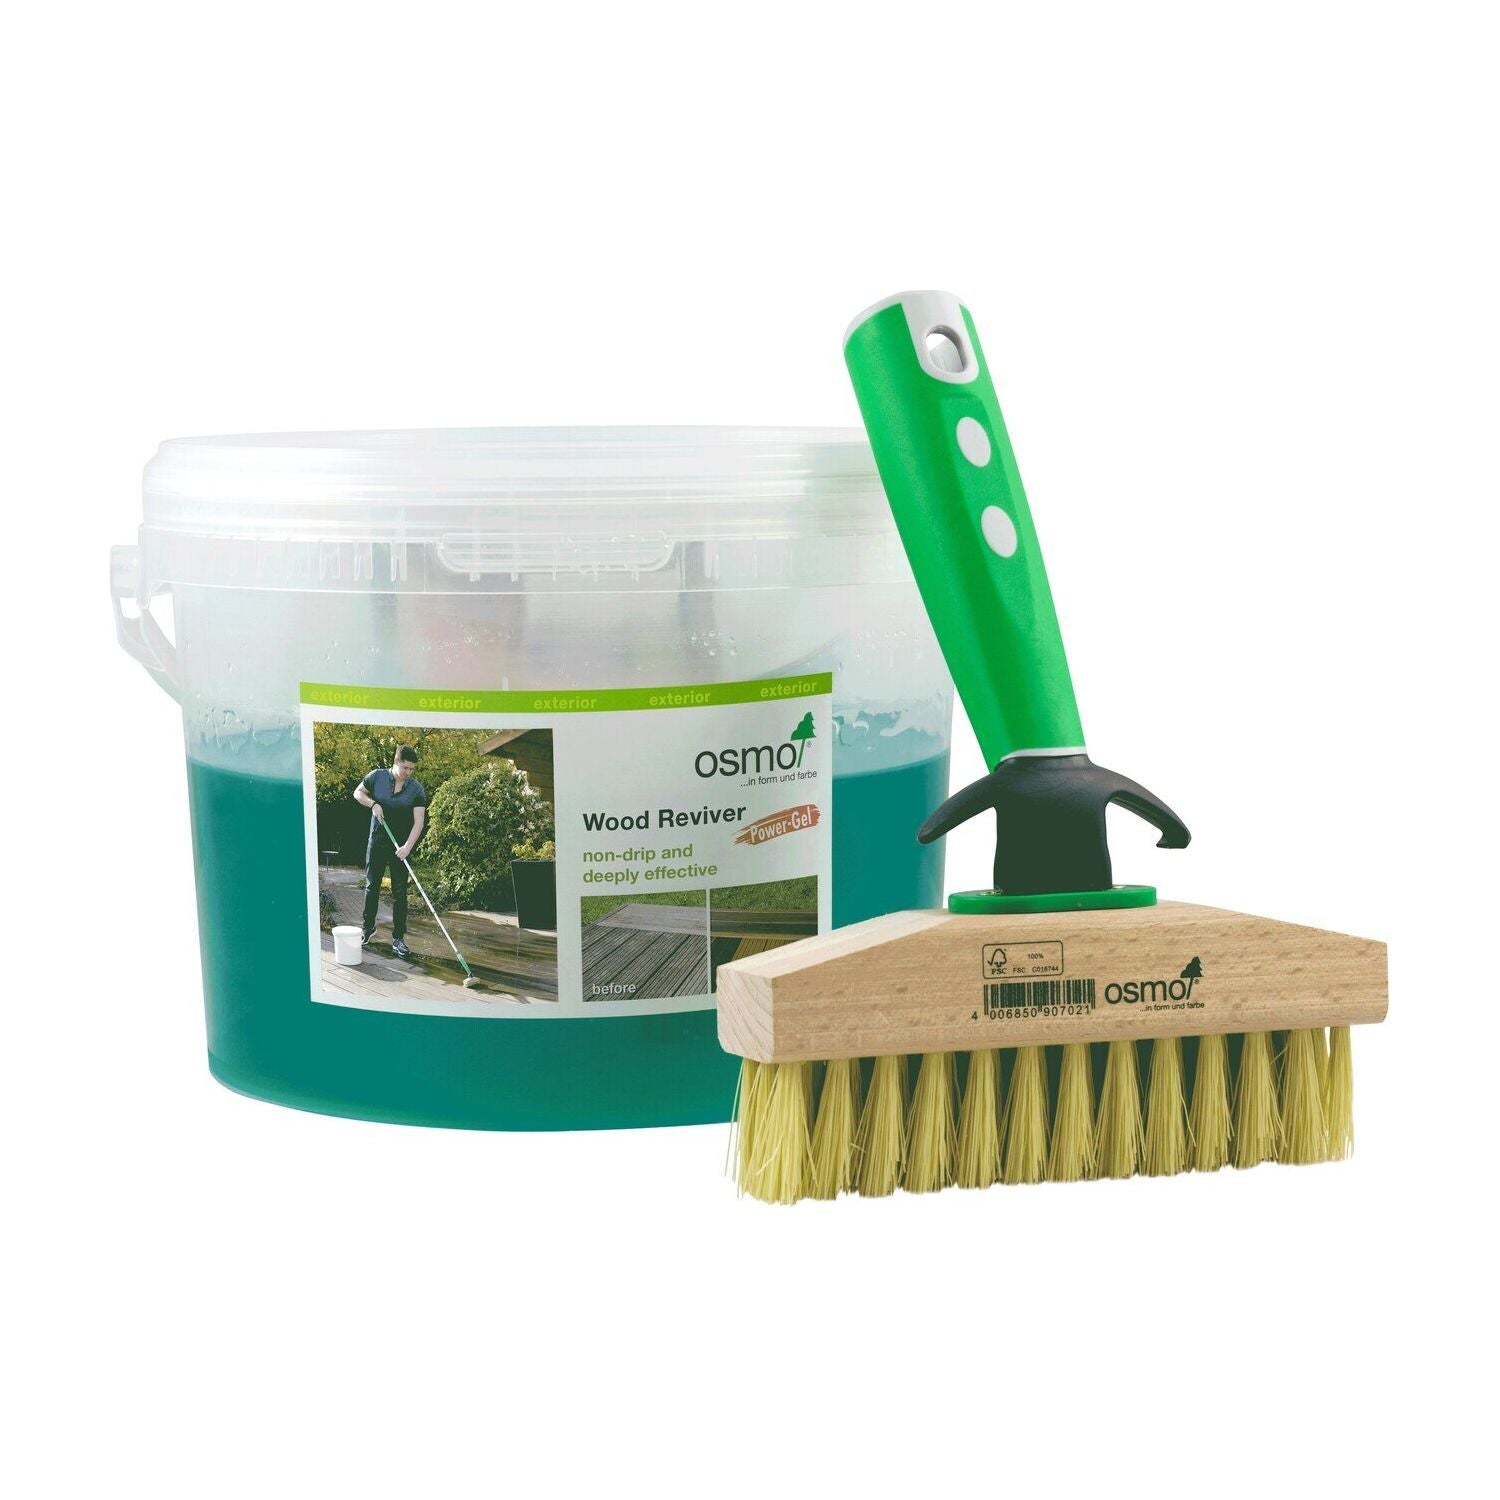 Osmo Wood Reviver Power Gel with Decking Cleaning Brush 2.5L